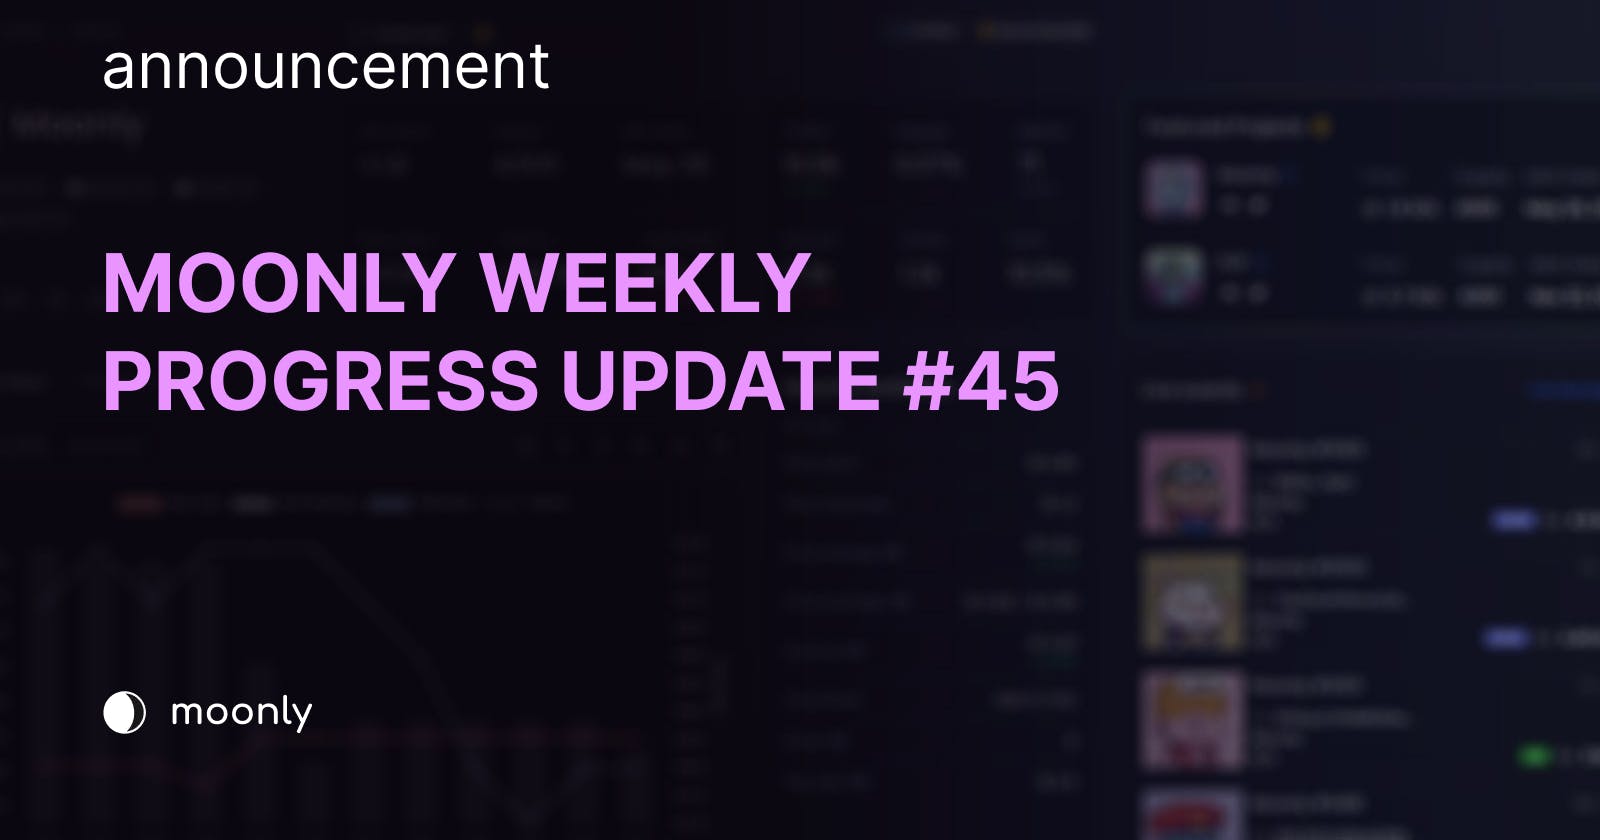 Moonly weekly progress update #45 - First Staking Client